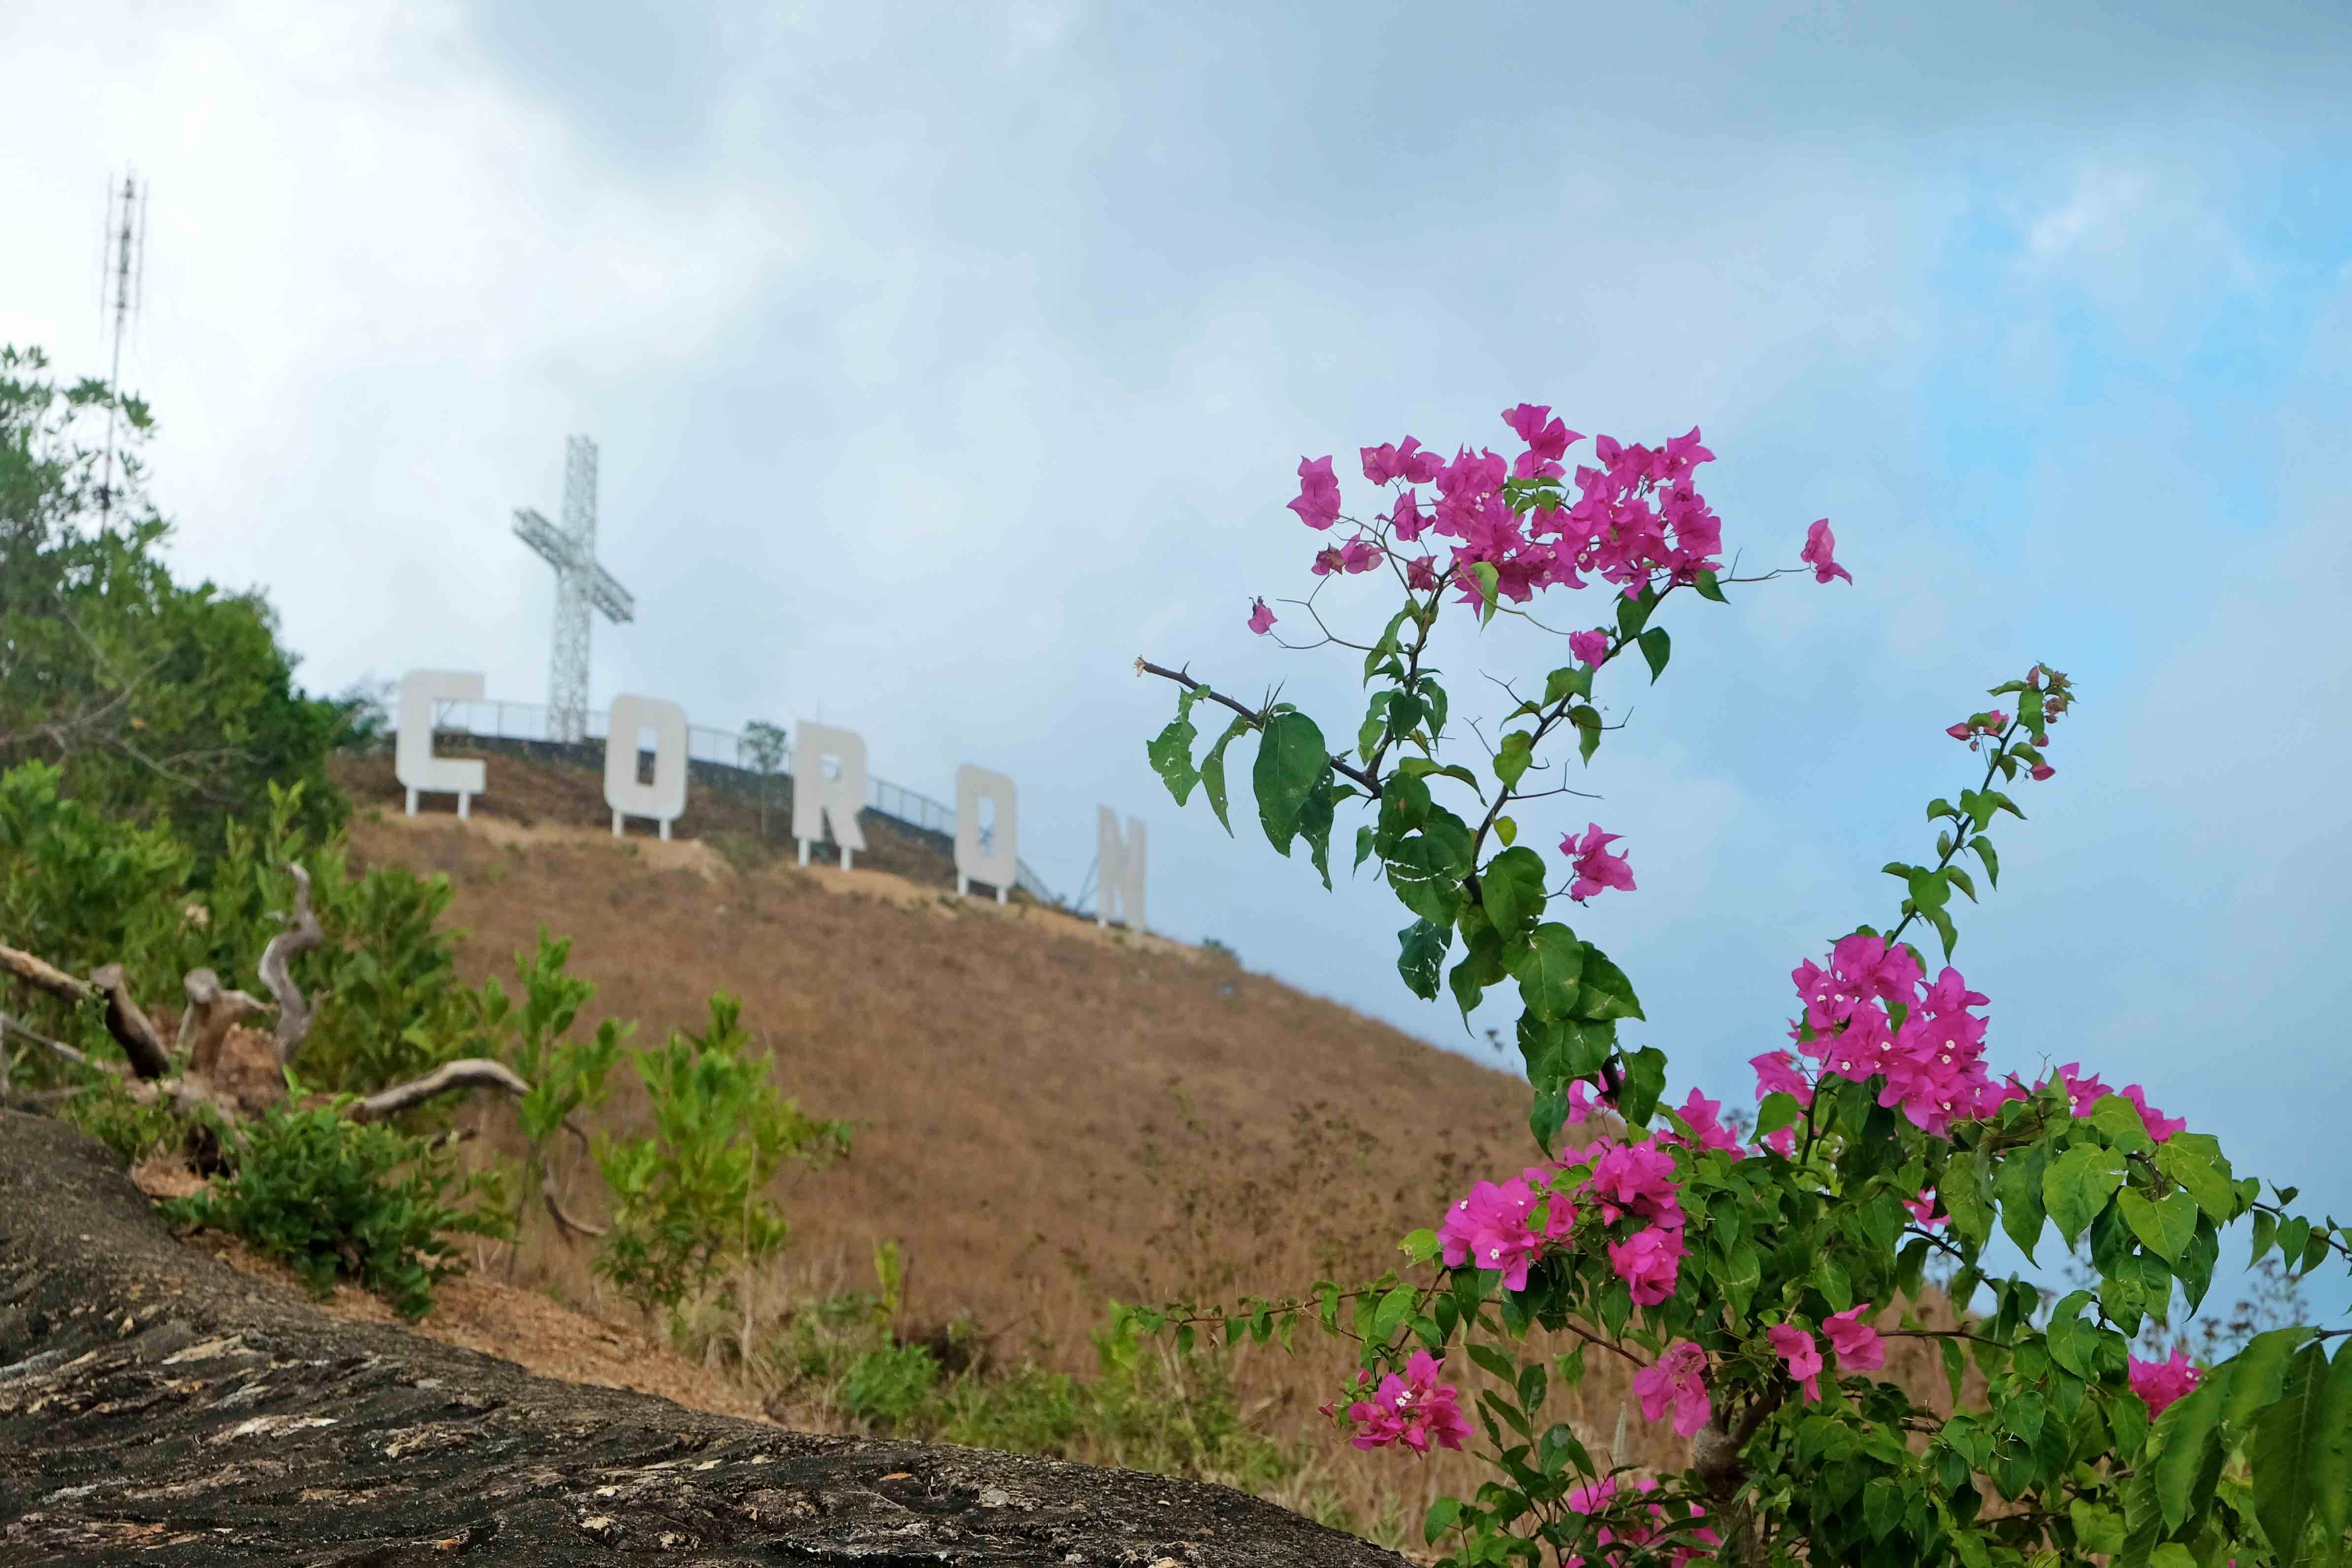 Panoramic climb to Mt. Tapyas (overlooking the town & nearby islands). Photo by Potpot Pinili/Rappler 